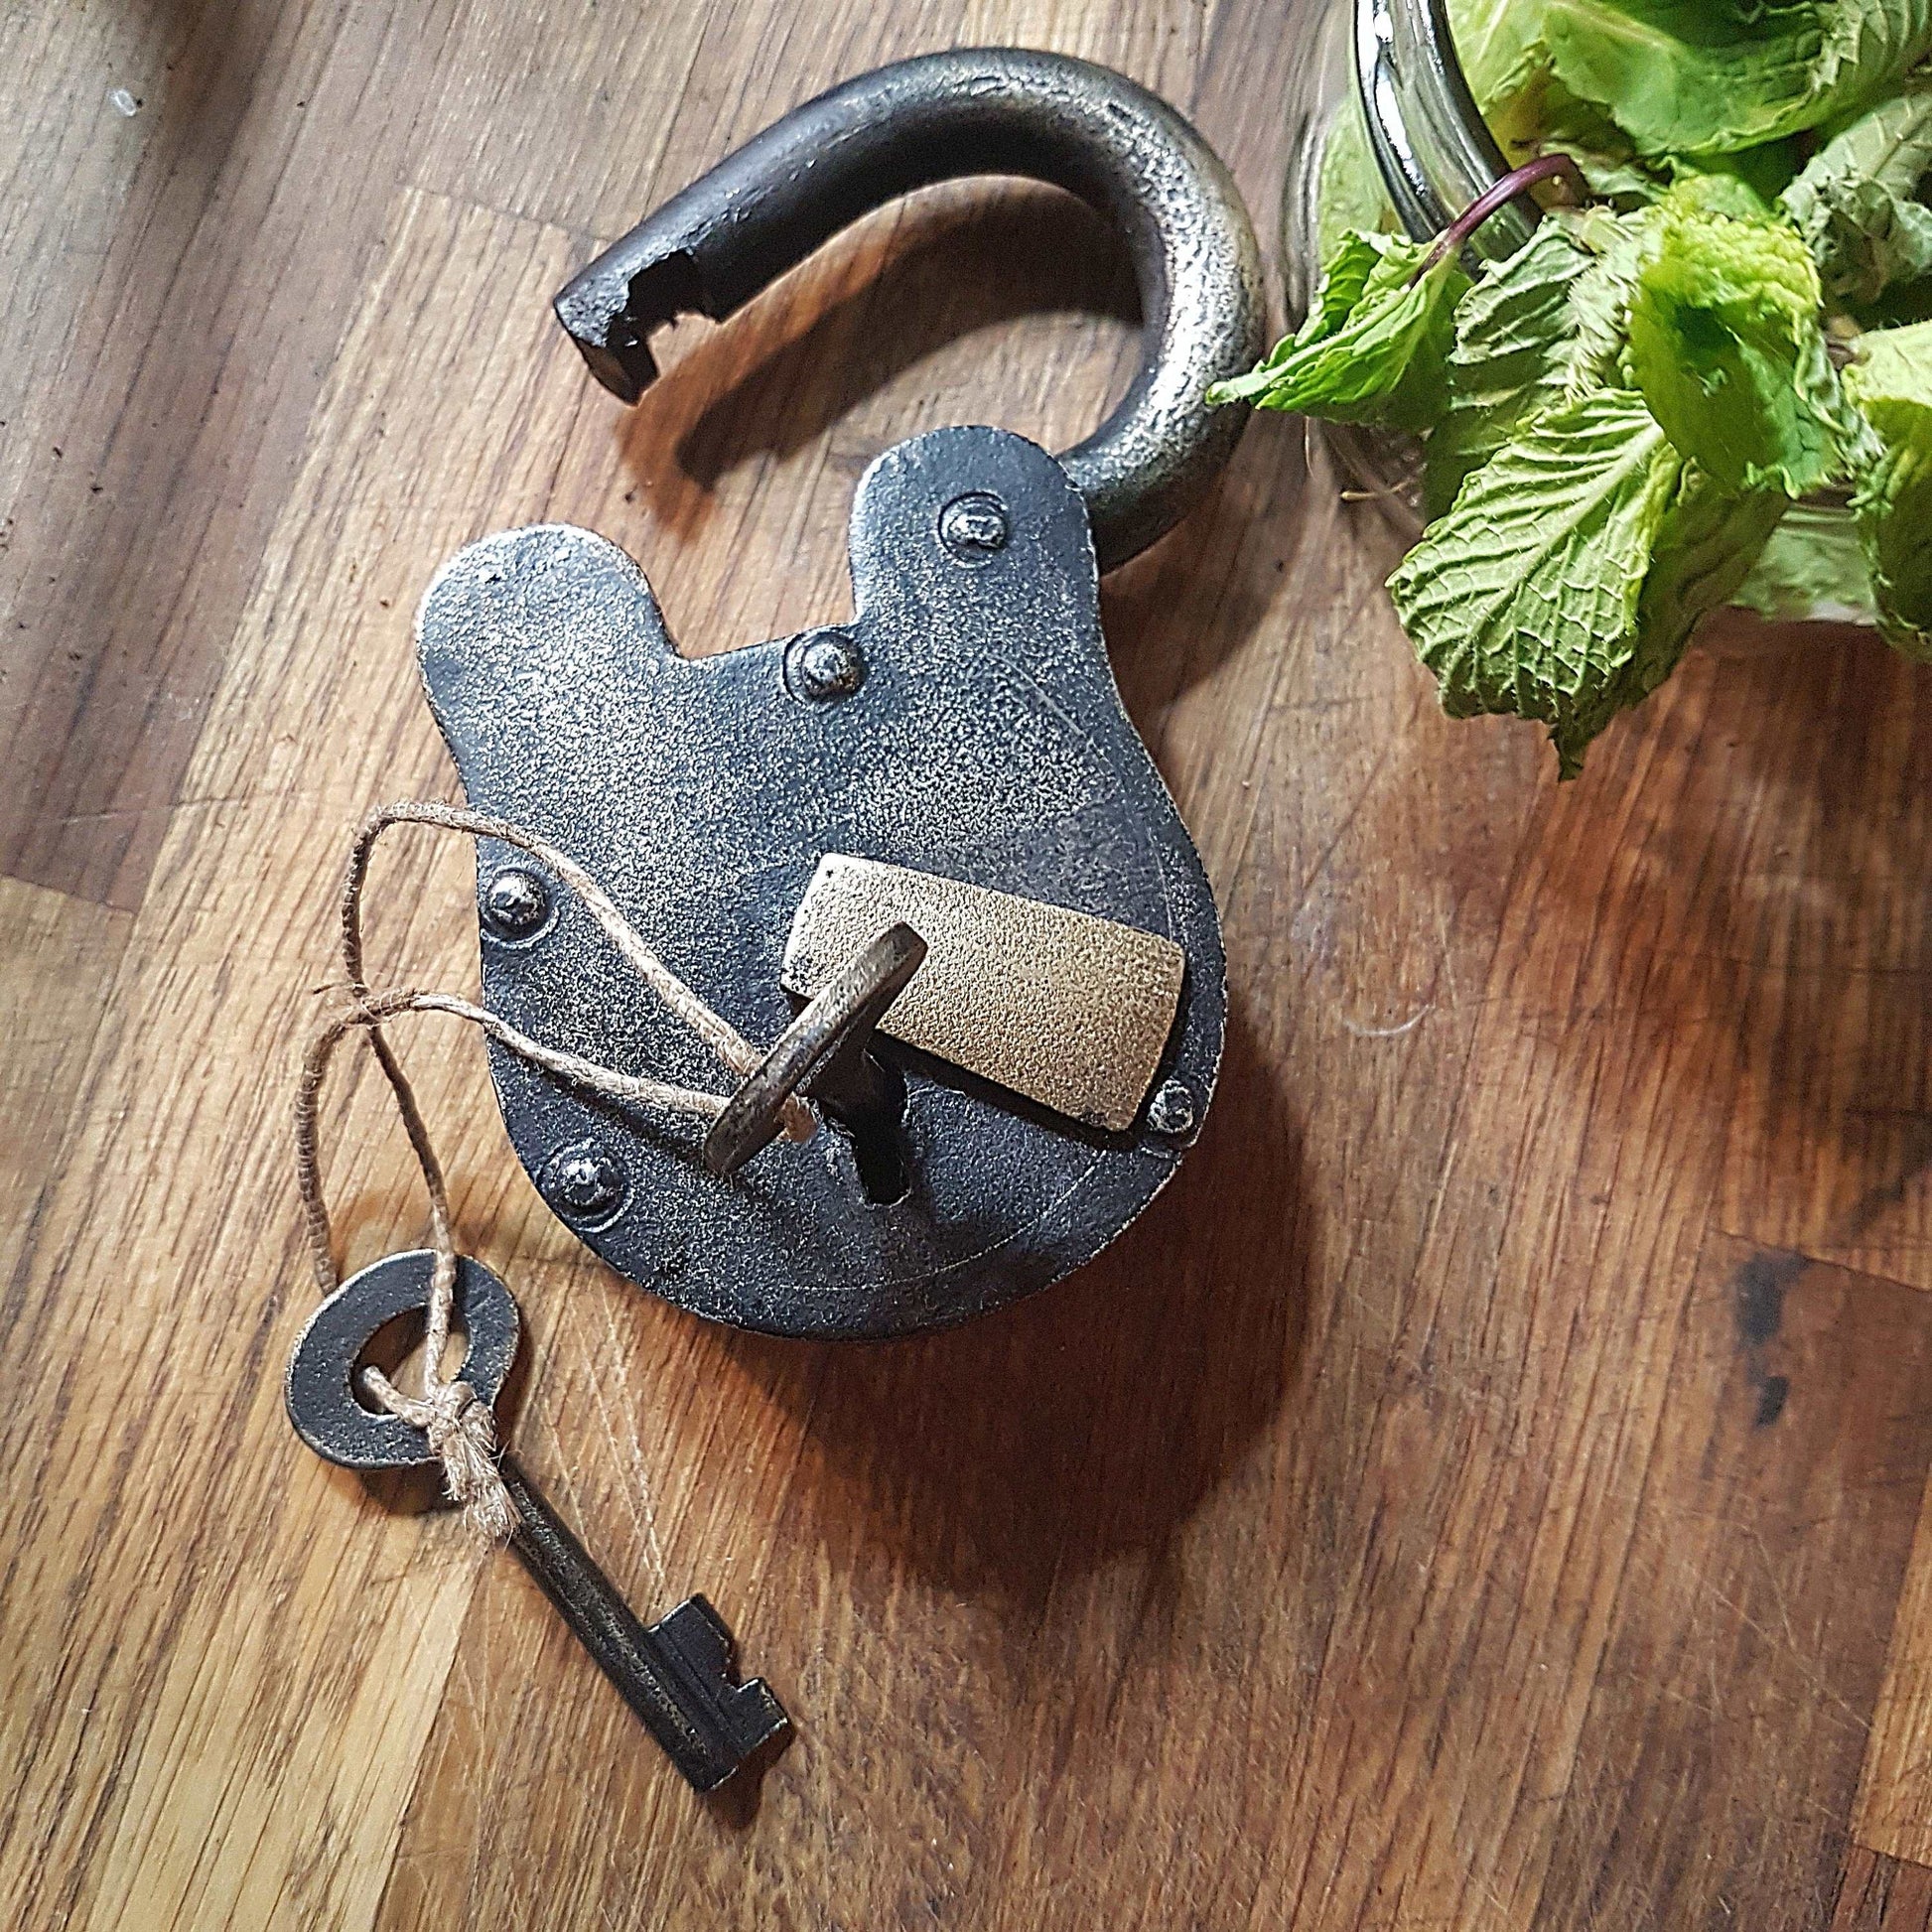 Antique metal pad lock in iron & bronze.  Padlock 4 by 3 inches with 2 vintage keys. Unique old world design. Functional lock collectible. - Vintage India Ca